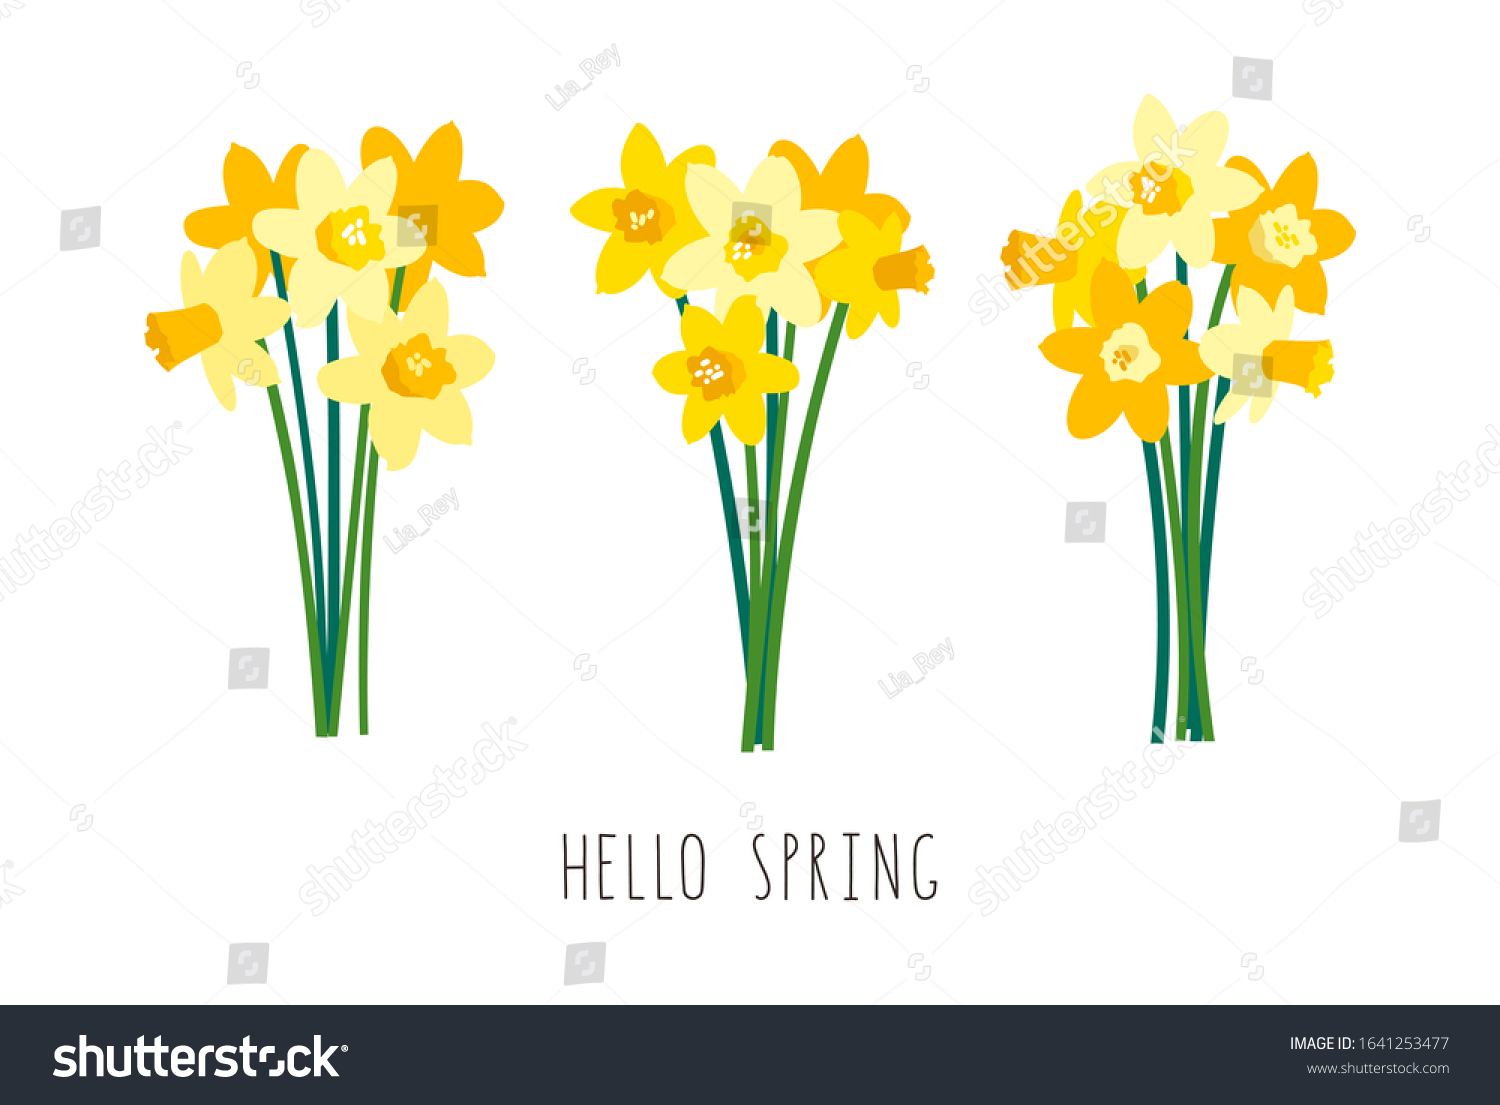 SVG of Vector set of positive floral illustrations isolated on white background. Early spring garden flowers. Yellow daffodils bouquet. Greeting card template, festive poster, banner. Handwritten lettering svg